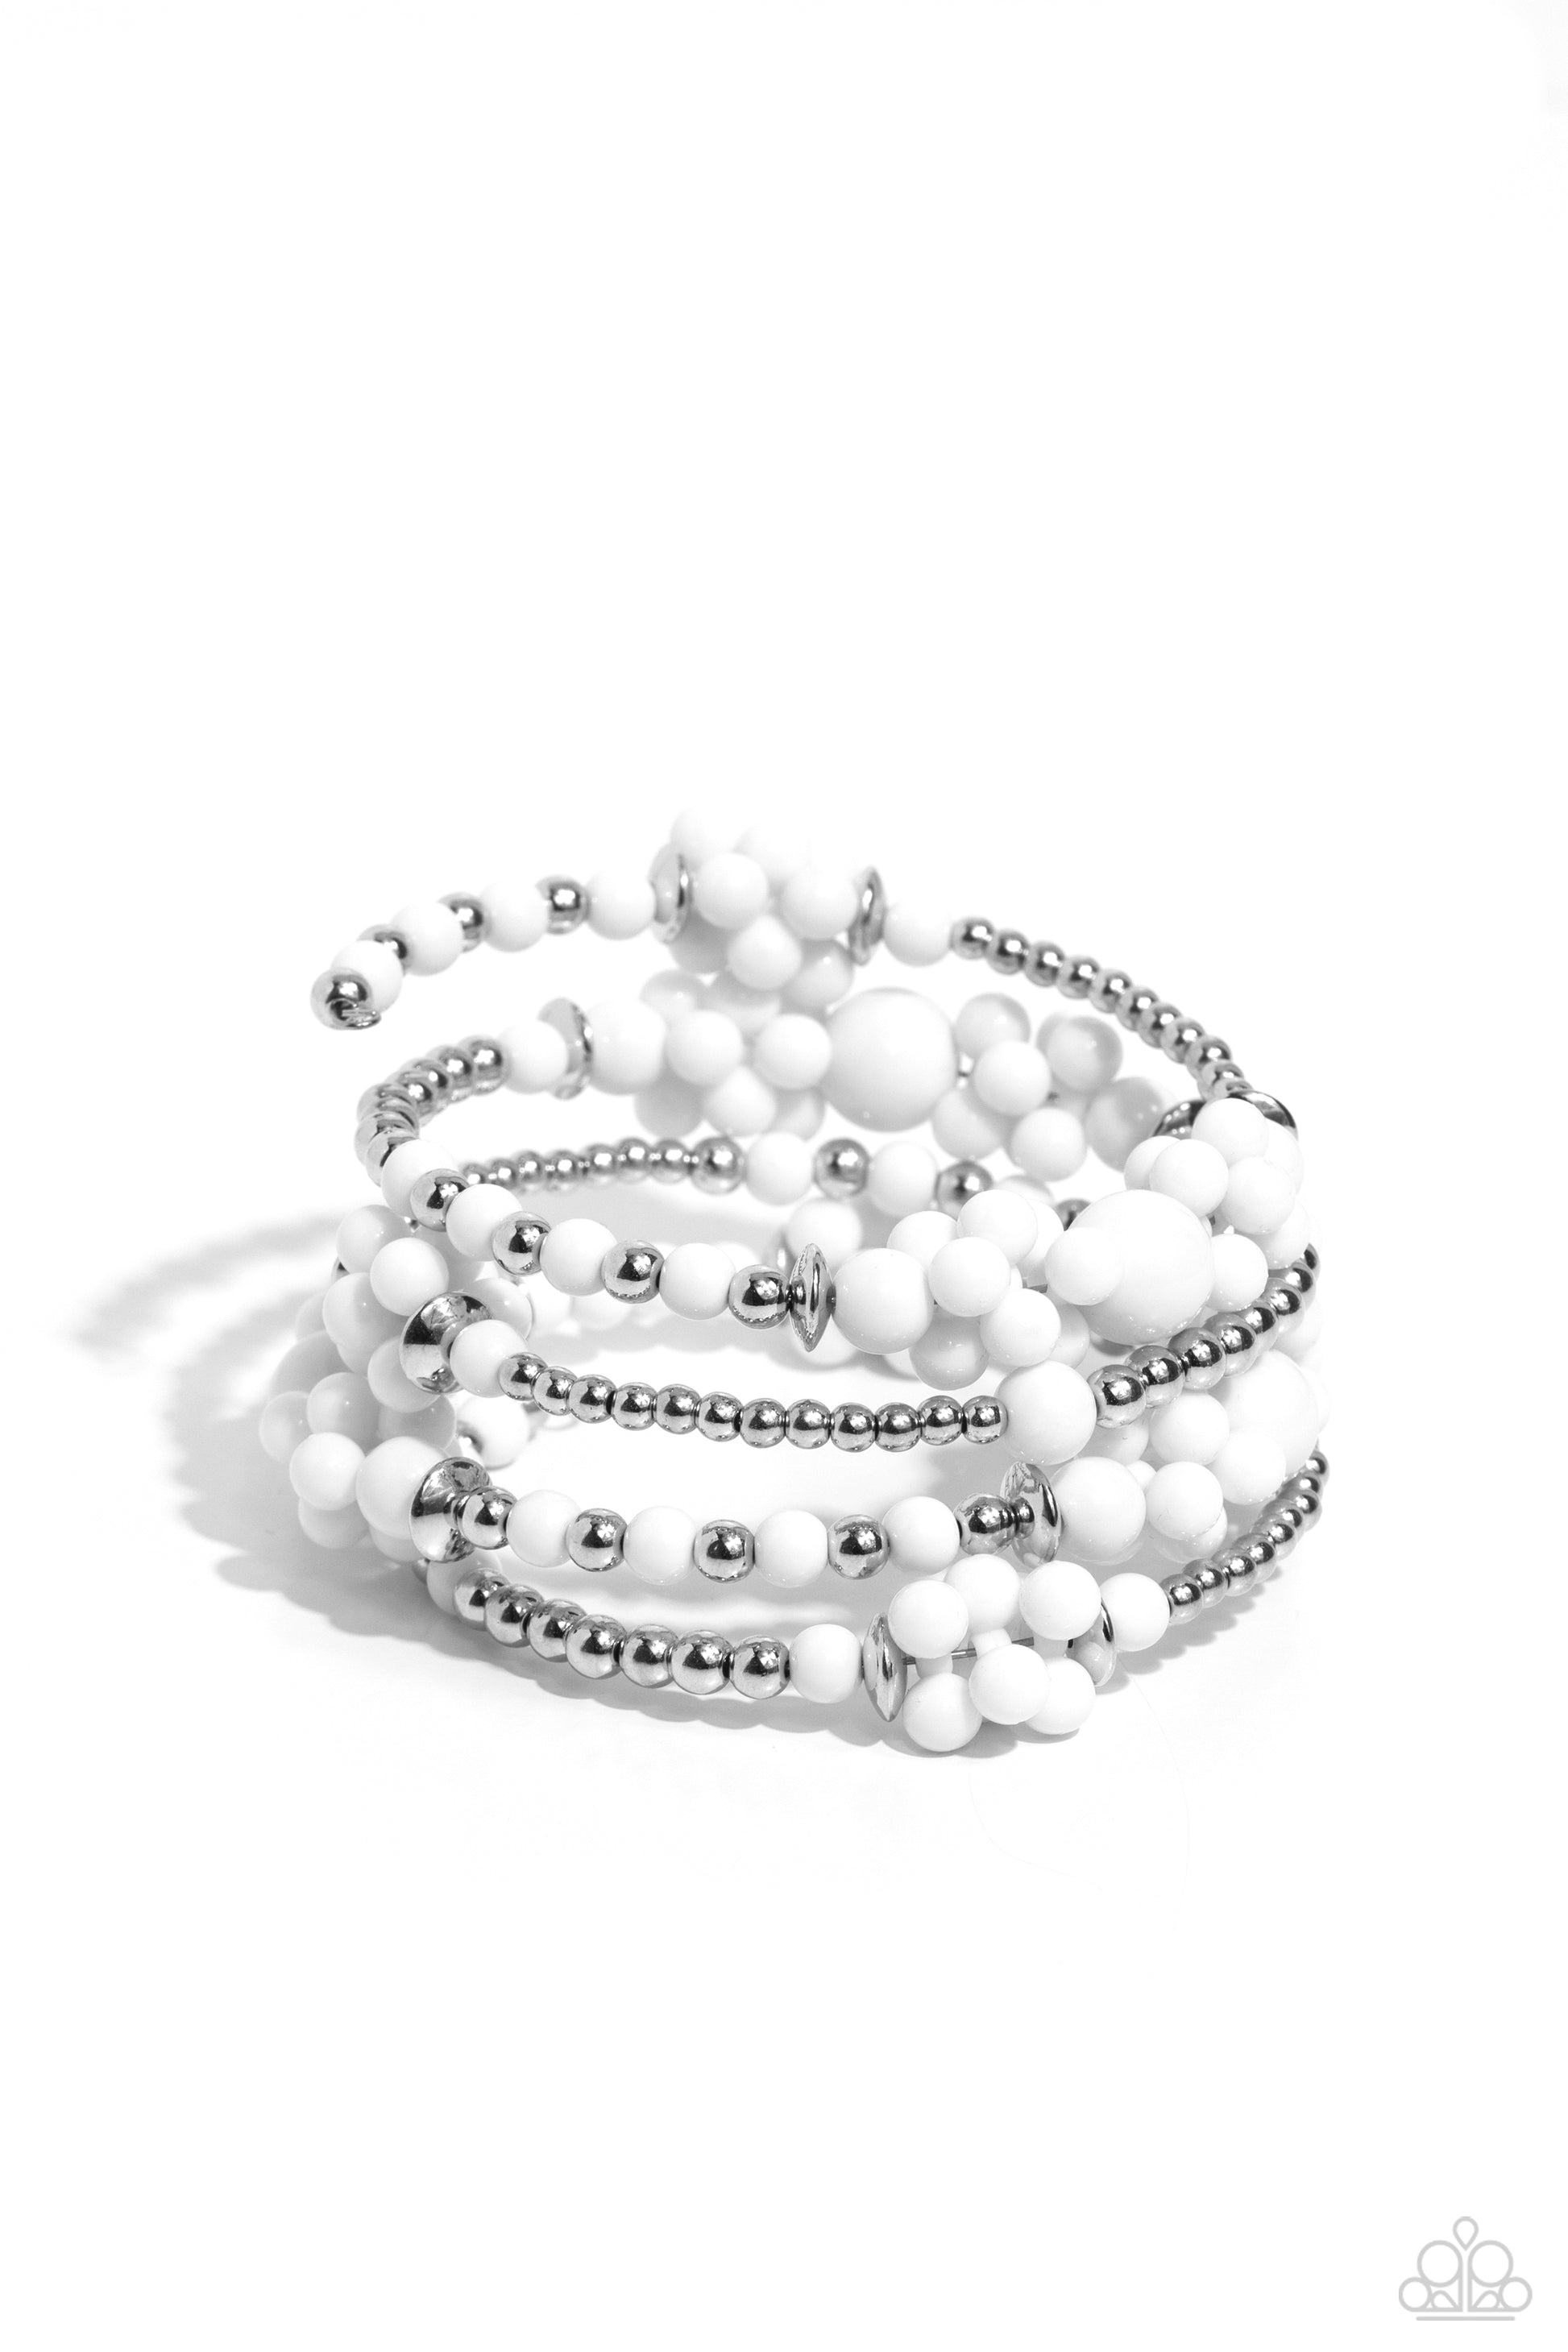 <p data-mce-fragment="1">Paparazzi Accessories - Compelling Clouds - White Bracelets strands of sleek silver beads and accents mixed with white acrylic beads in varying sizes are threaded along an infinity wrap-style bracelet. Clusters of white beads are sporadically infused along the design, creating cloud-like, ethereal layers around the wrist.</p> <p data-mce-fragment="1"><i data-mce-fragment="1">Sold as one individual bracelet.</i></p>